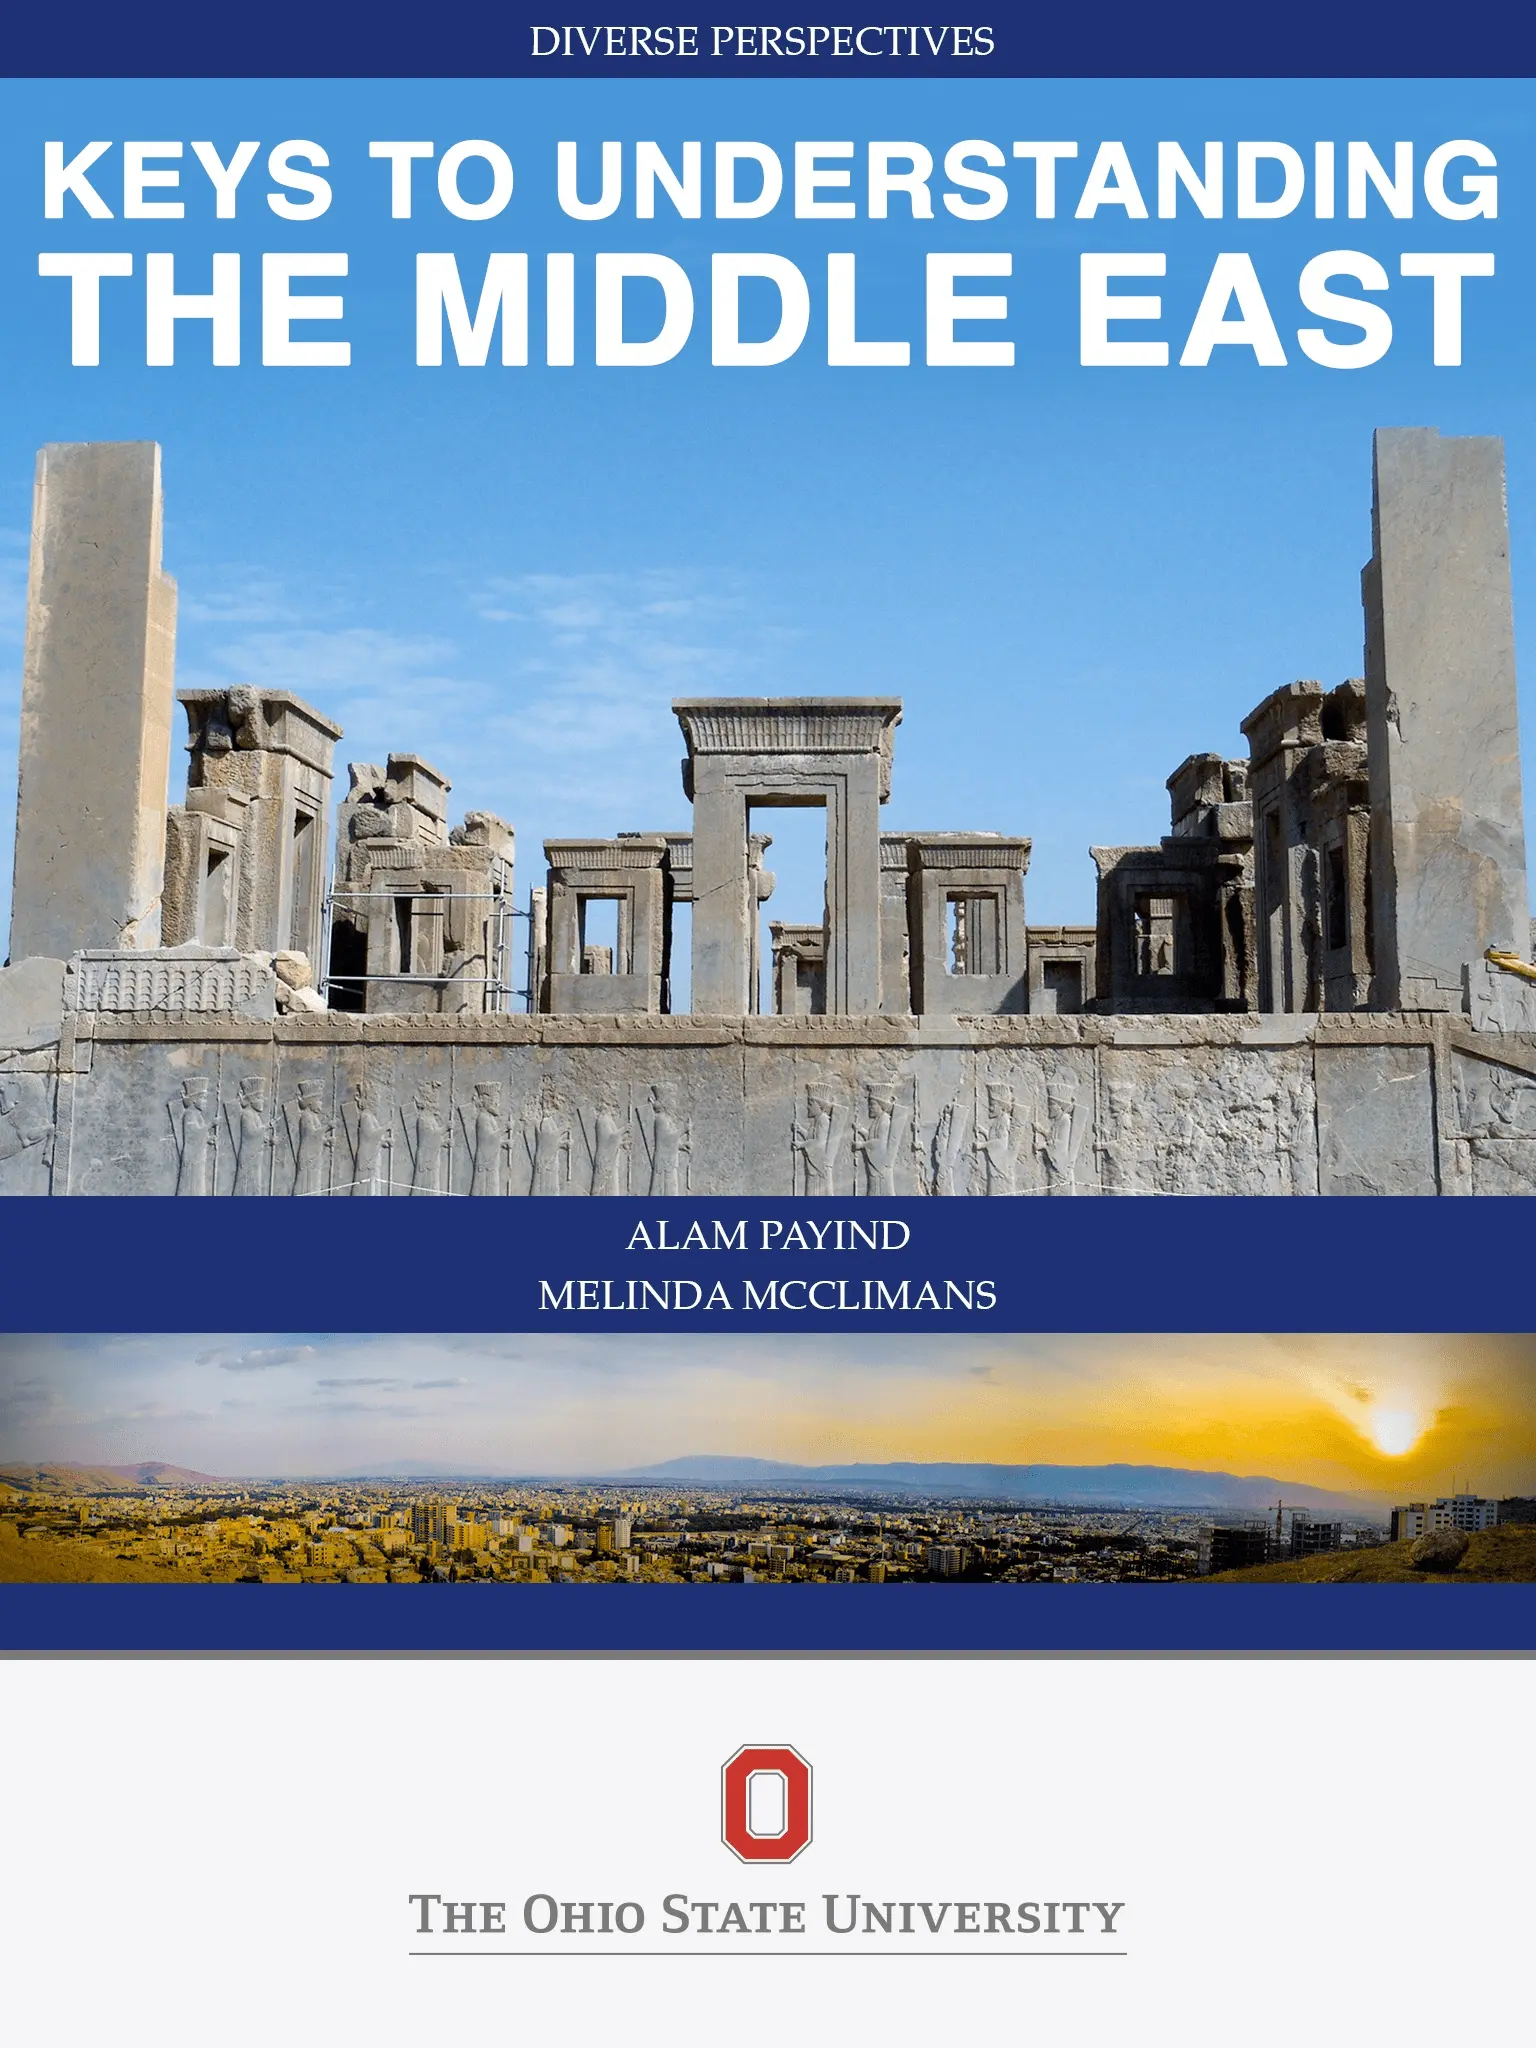 Cover Image of Keys to Understanding the Middle East